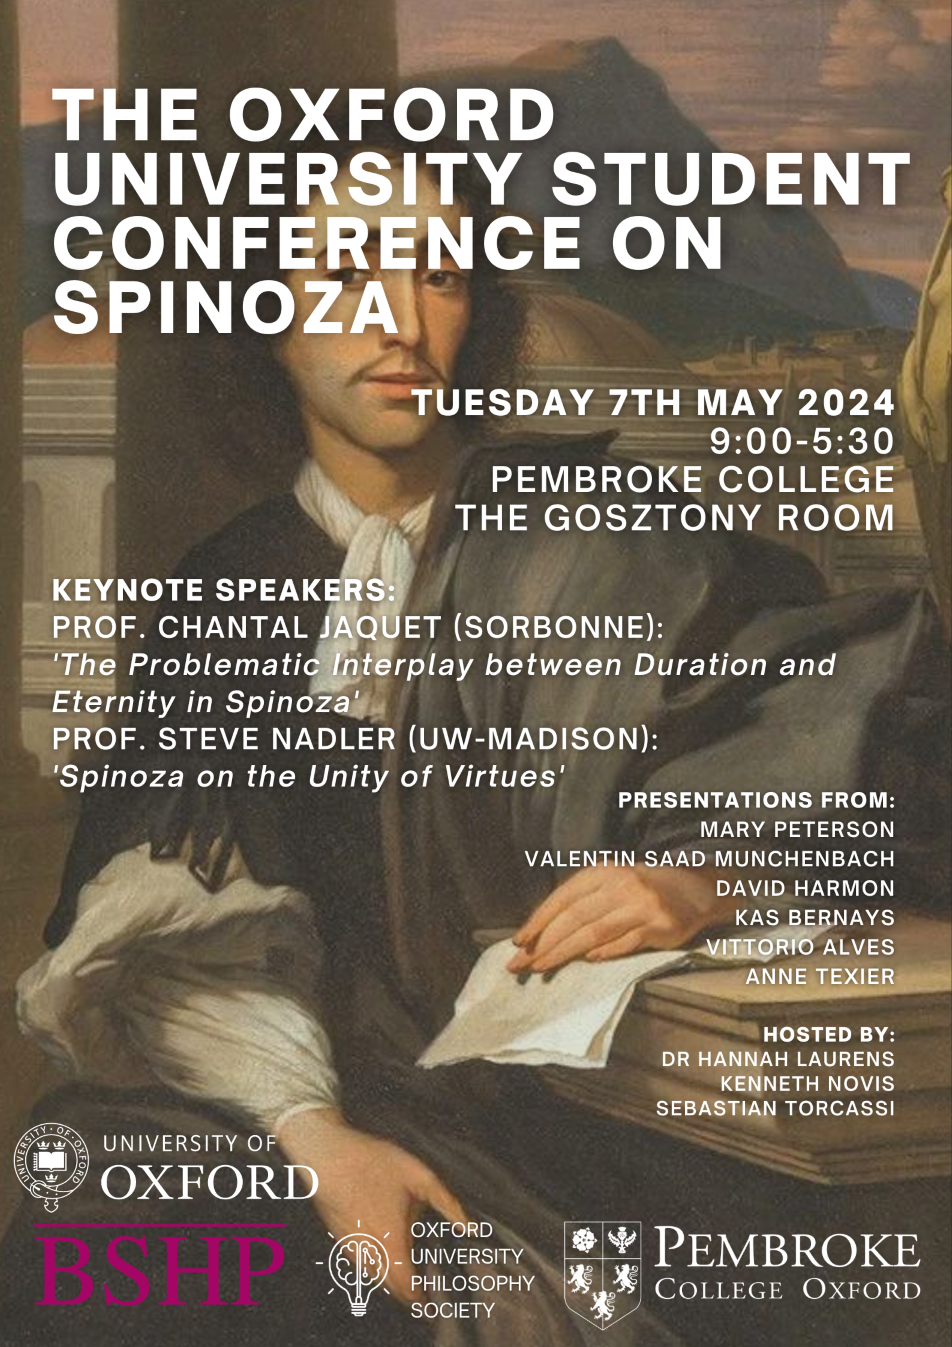 A poster for the Oxford University Student Conference on Spinoza, with details of the event (all included in the text here).